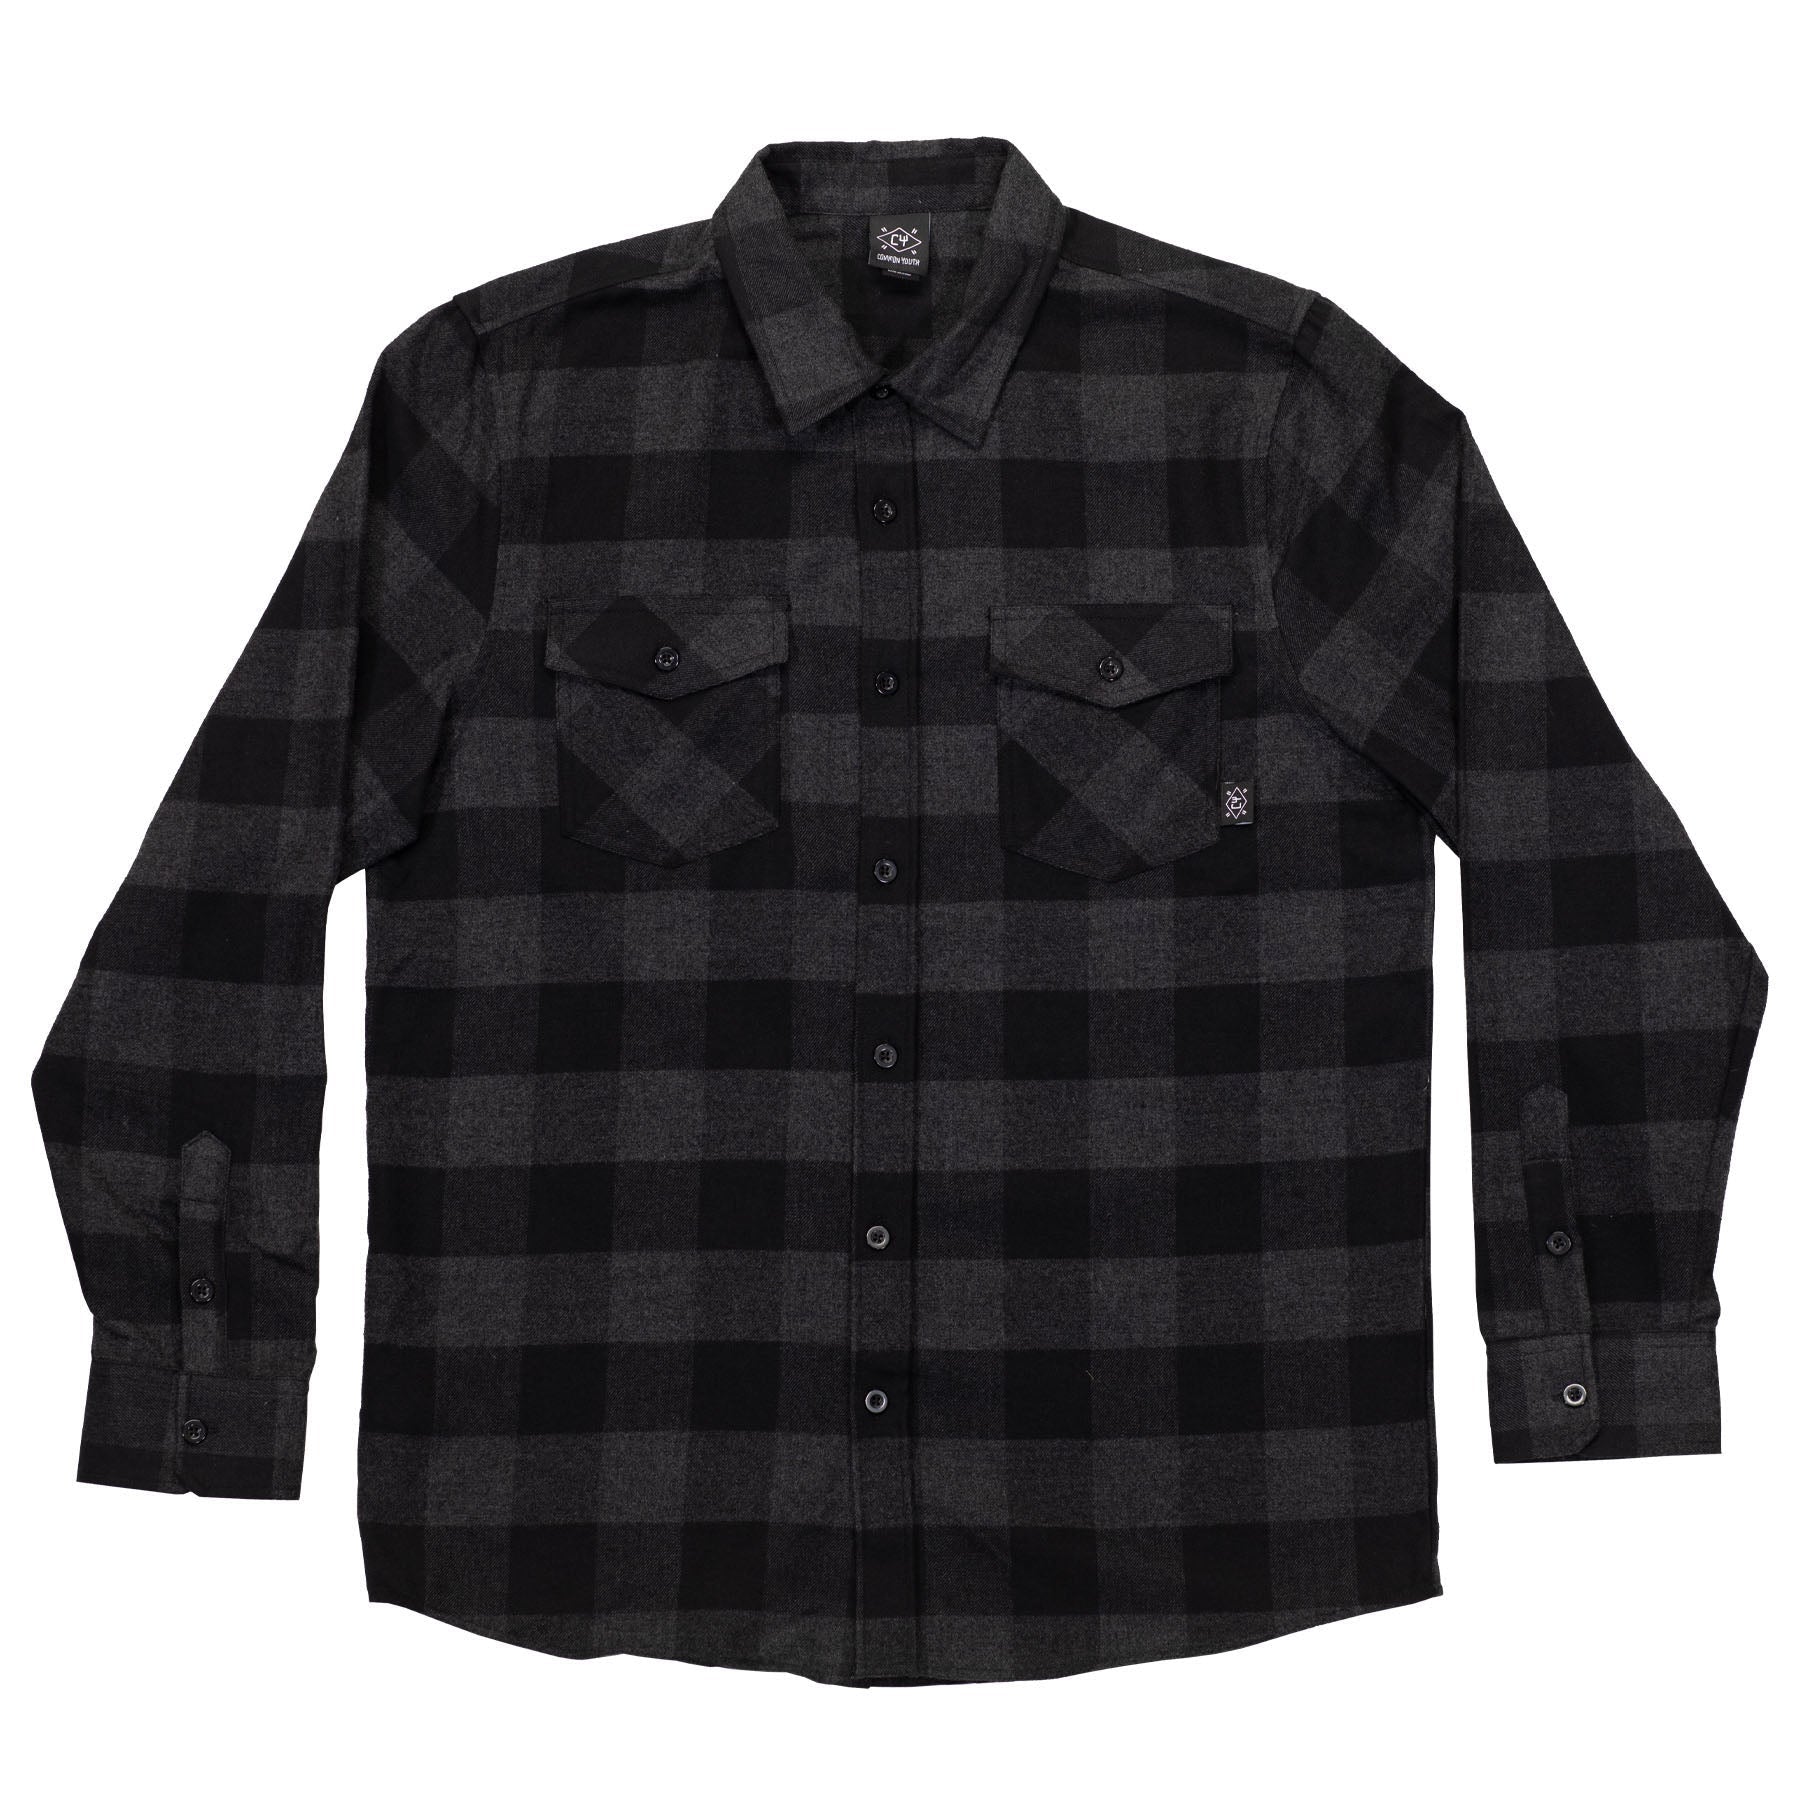 HIGHWAY FLANNEL - commonyouthbrand